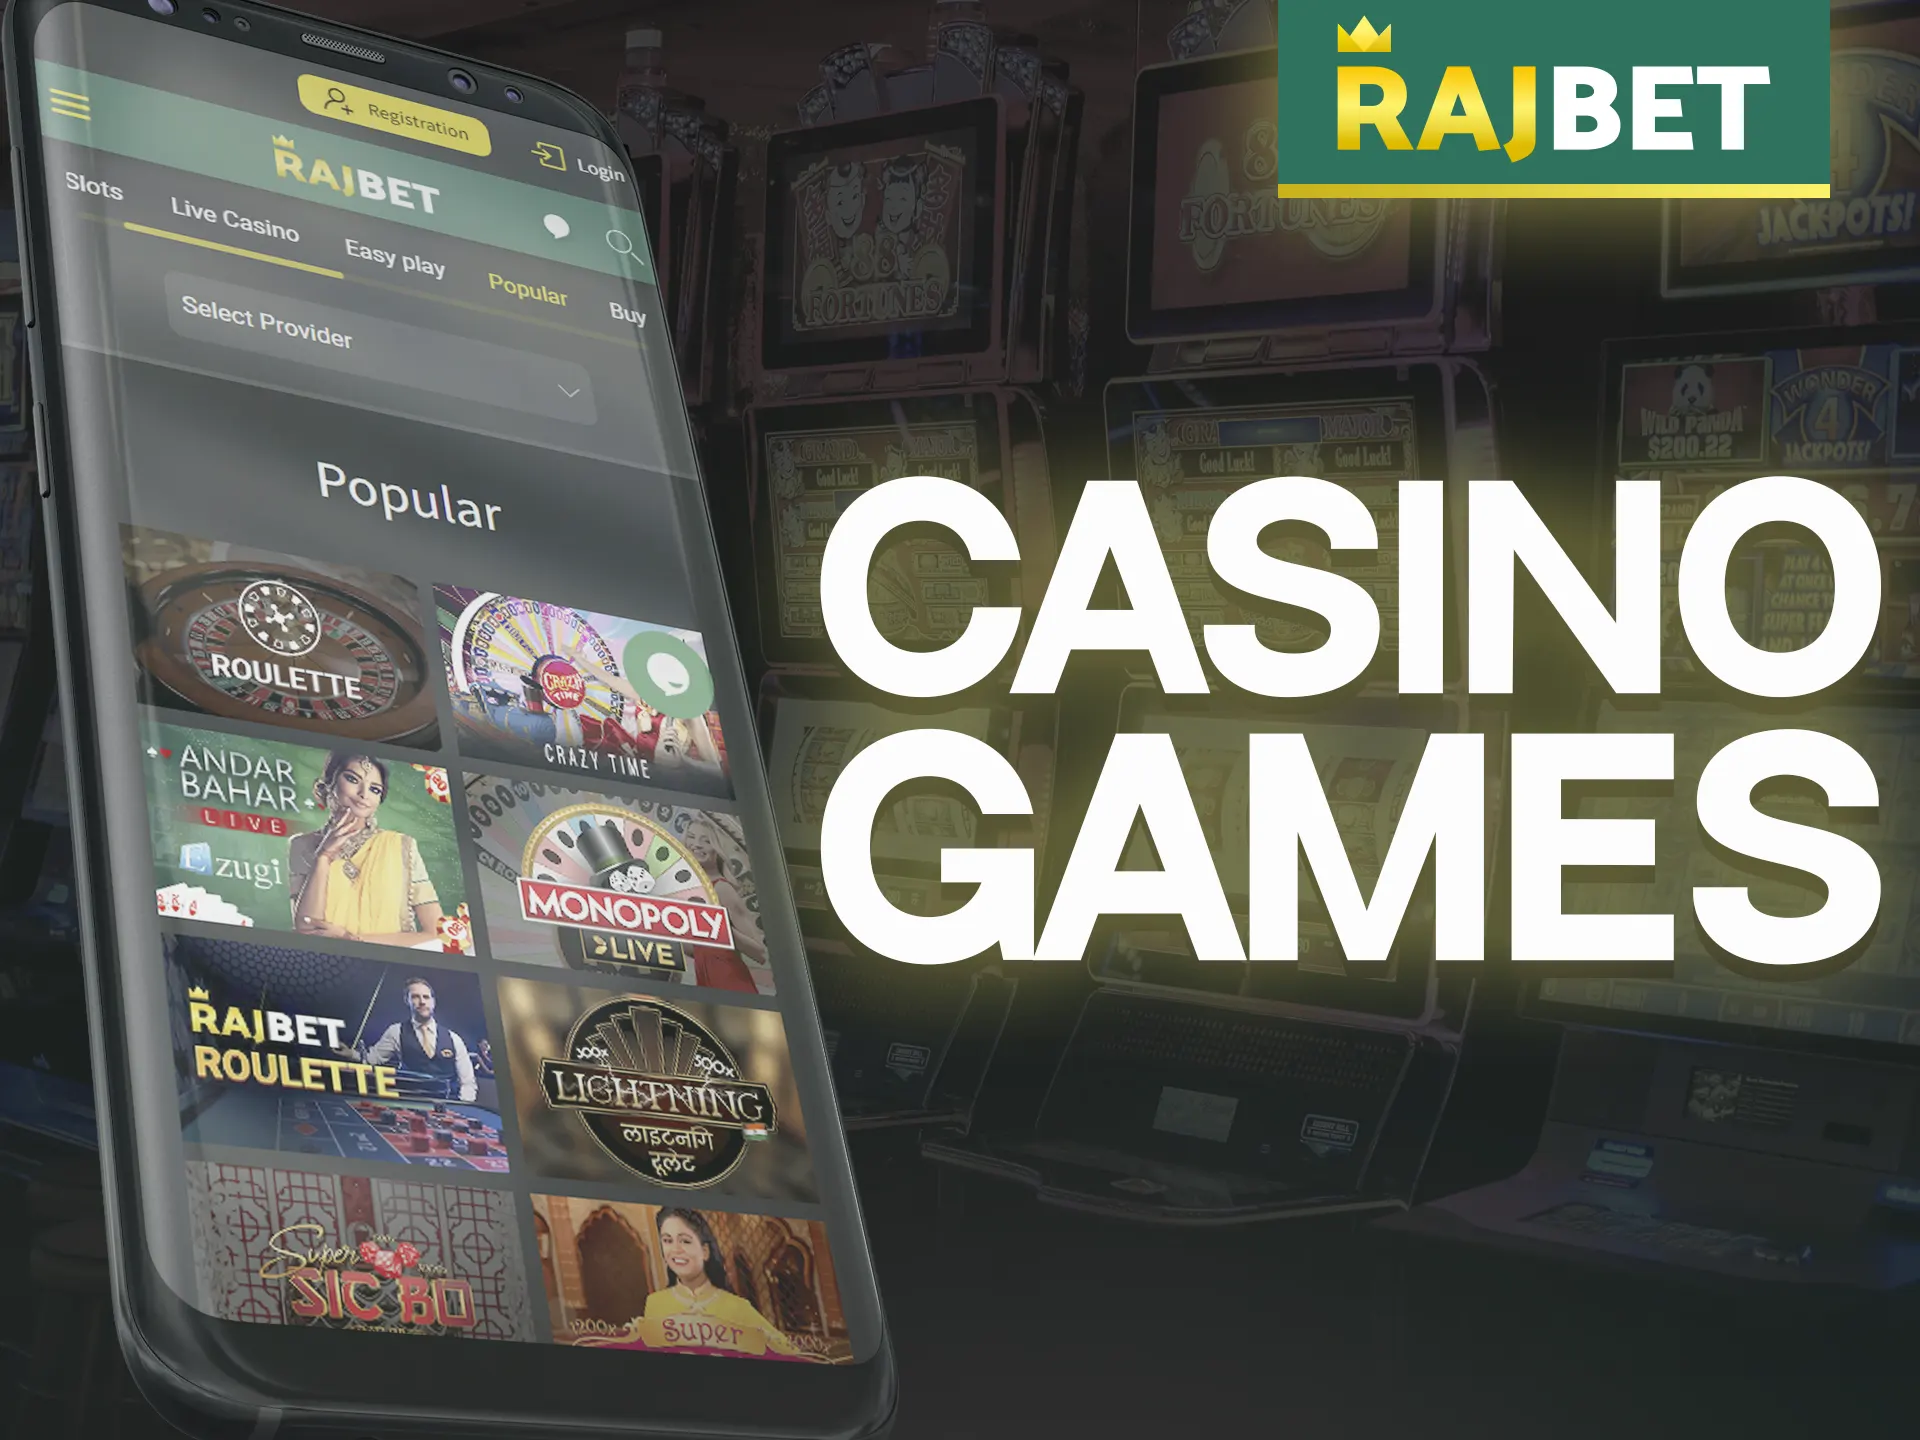 A huge selection of casino games is available on the Rajbet mobile app.